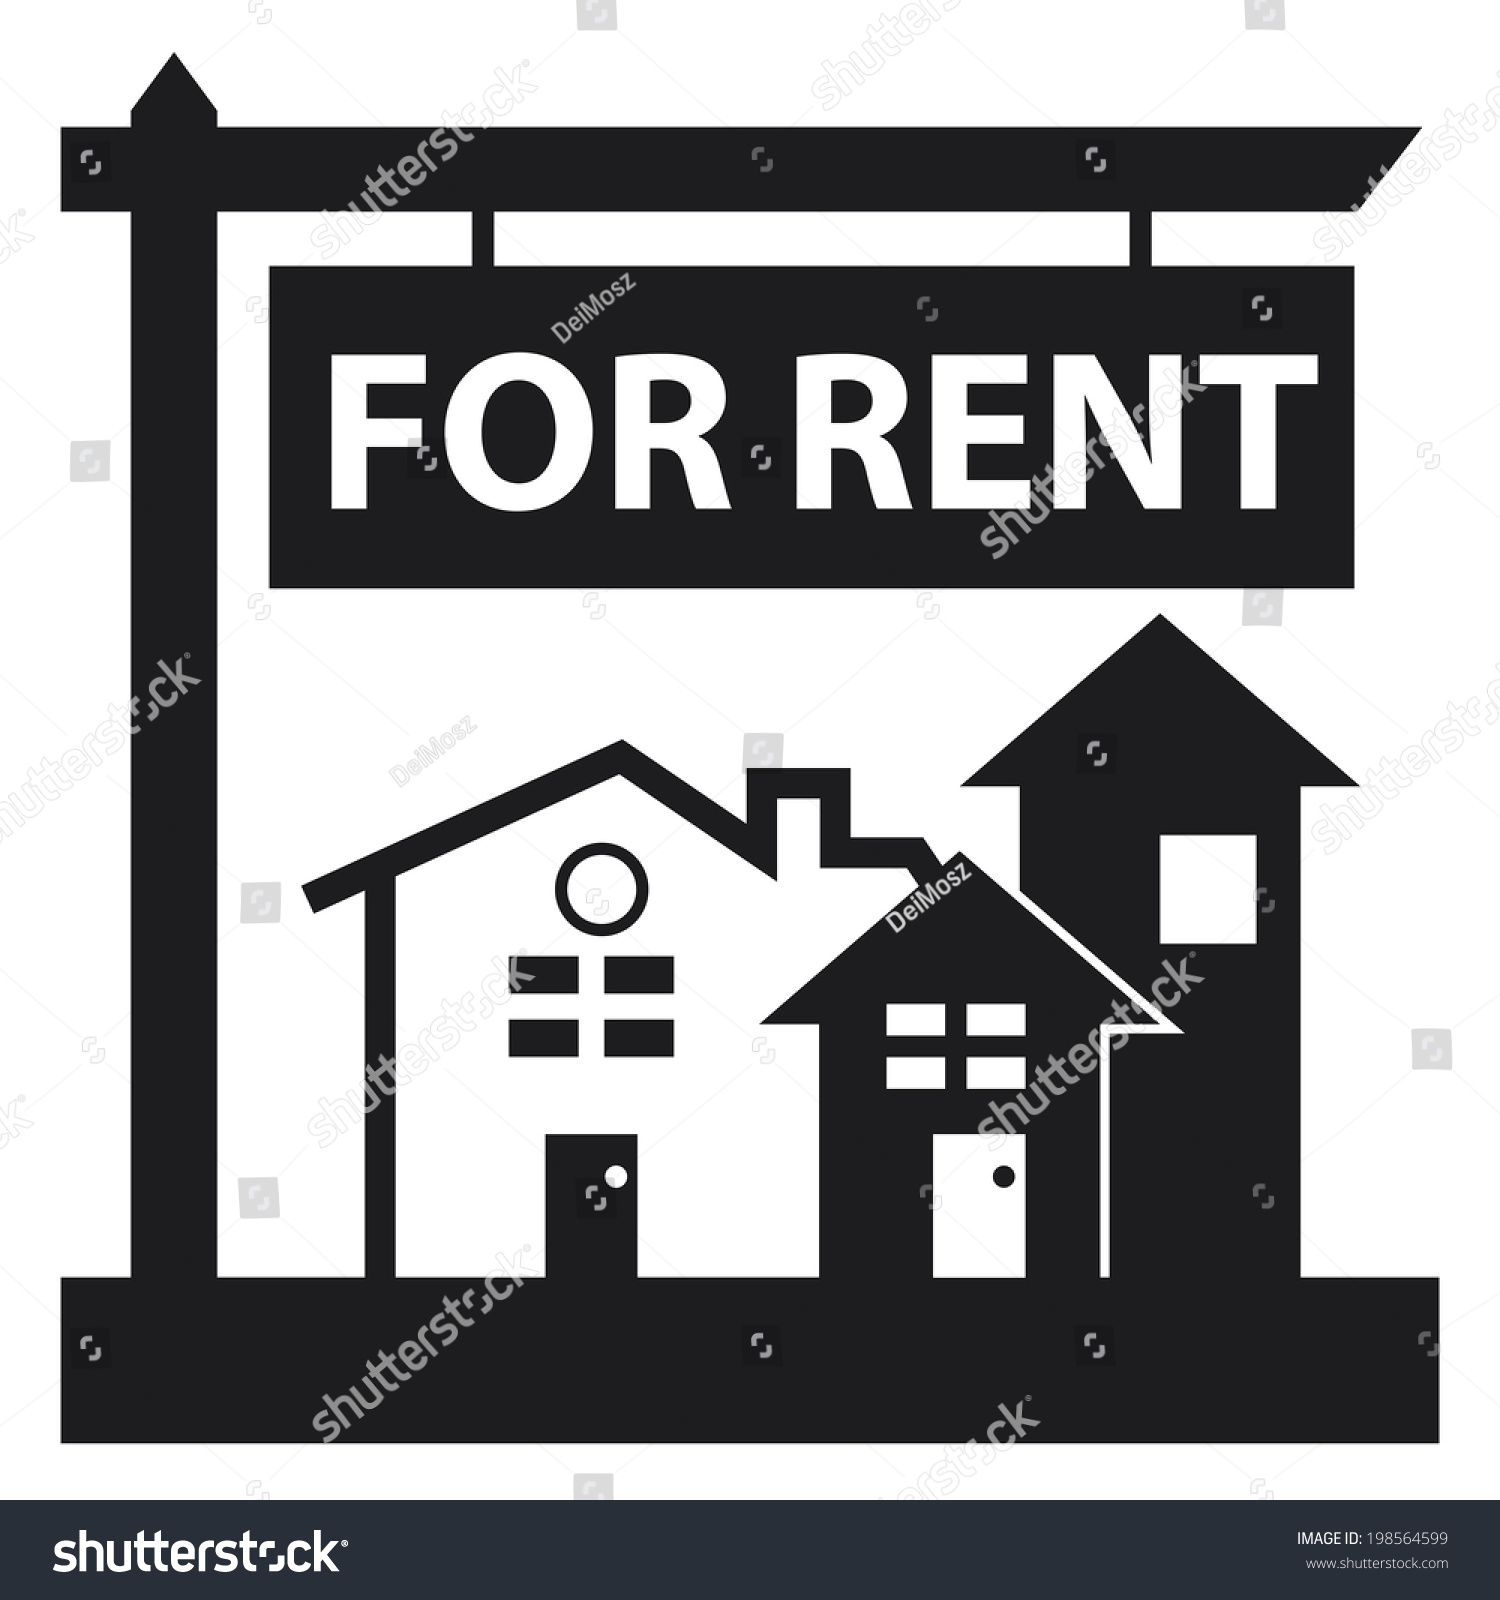 house for rent clipart - photo #26